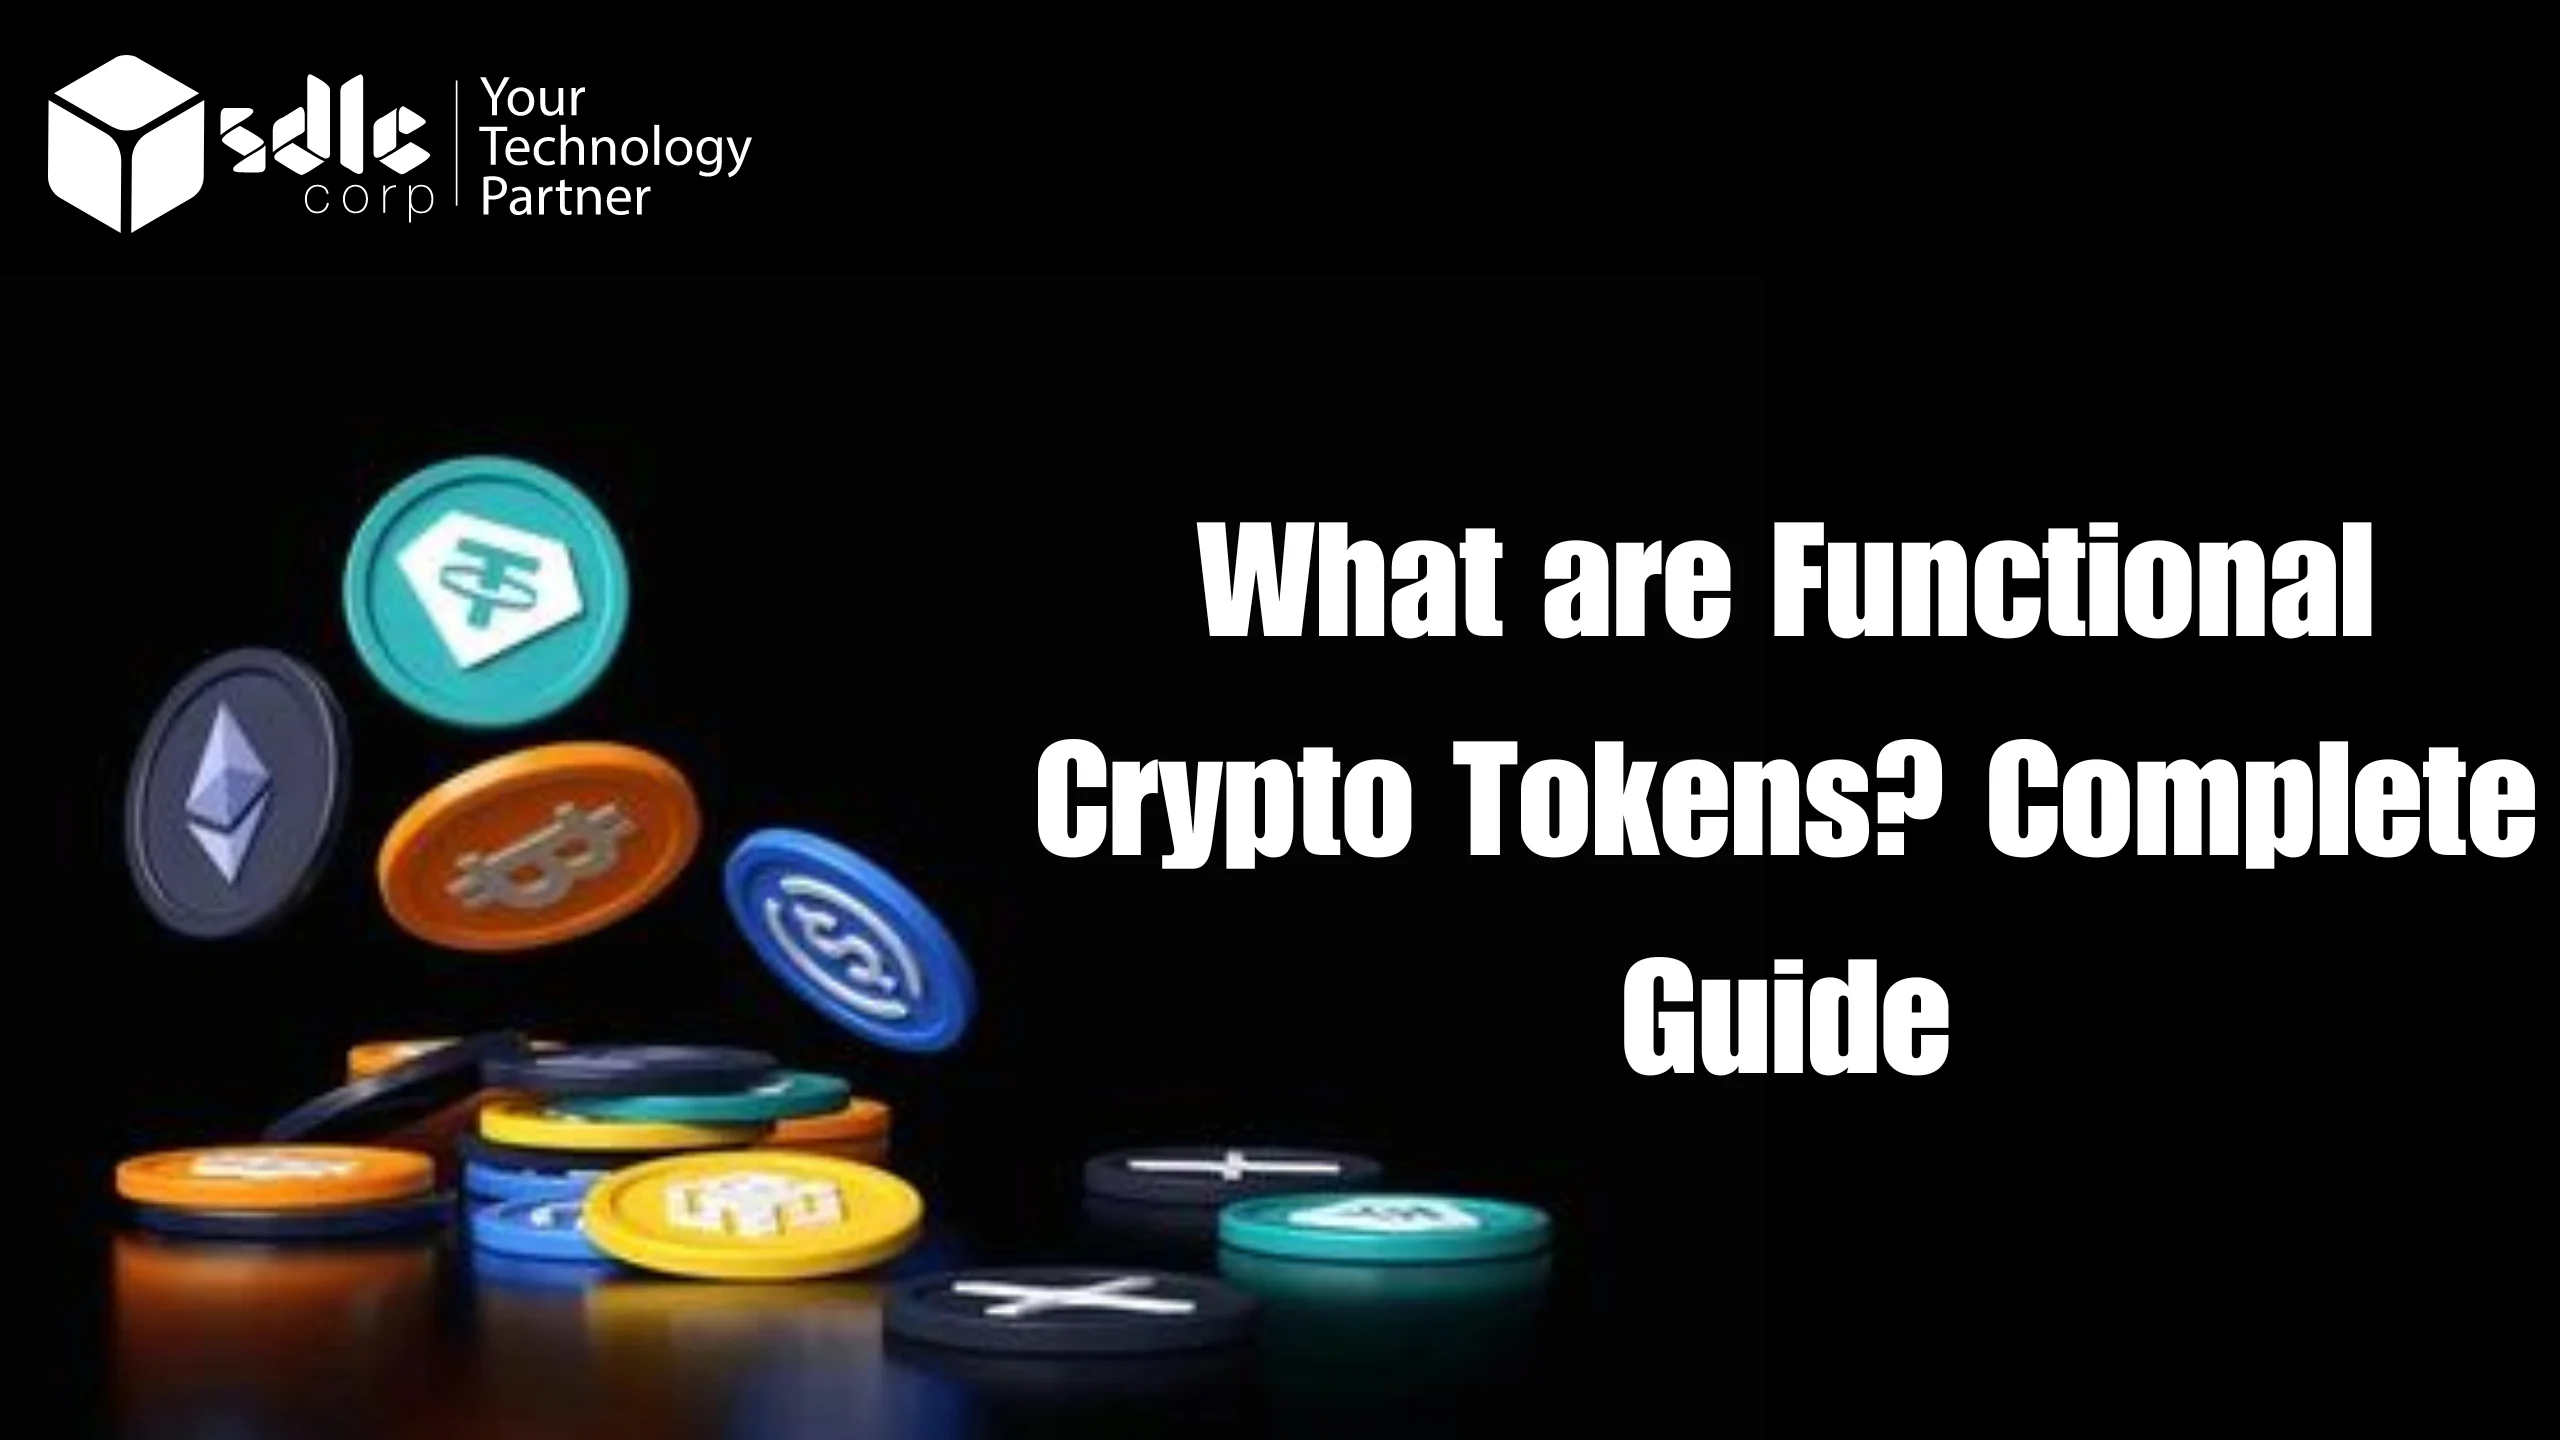 What are Functional Crypto Tokens? Complete Guide